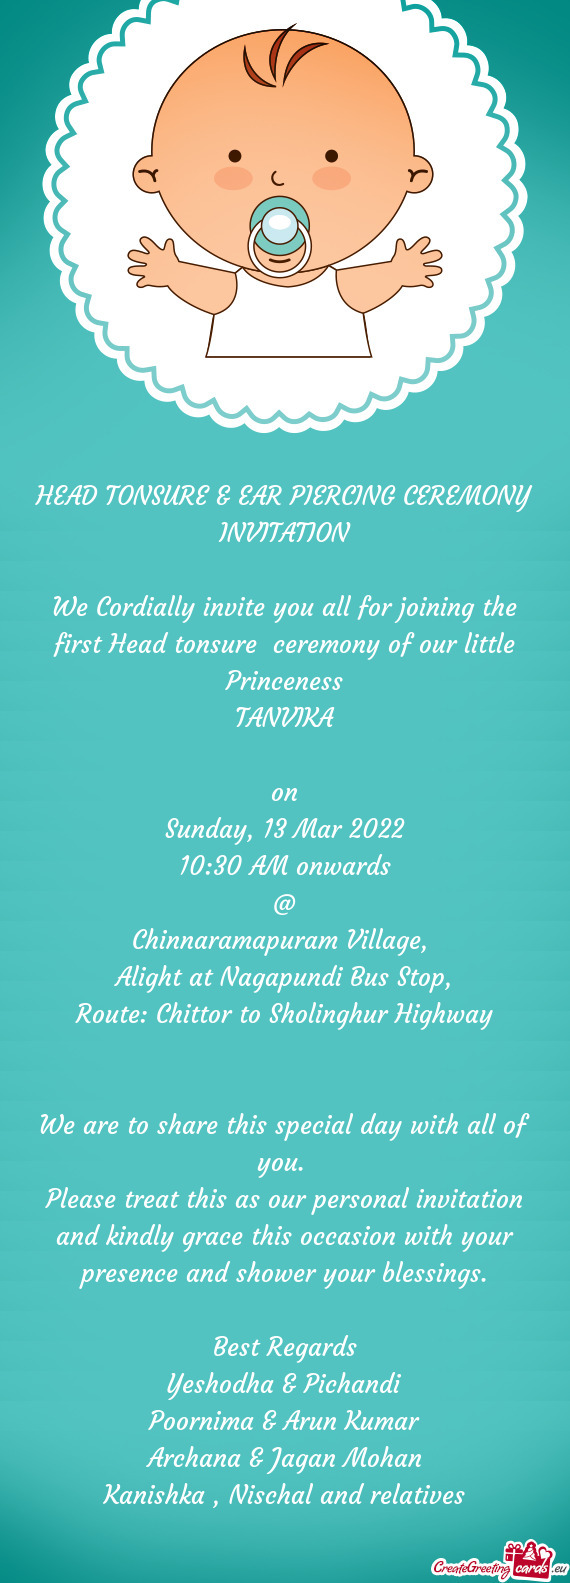 We Cordially invite you all for joining the first Head tonsure ceremony of our little Princeness